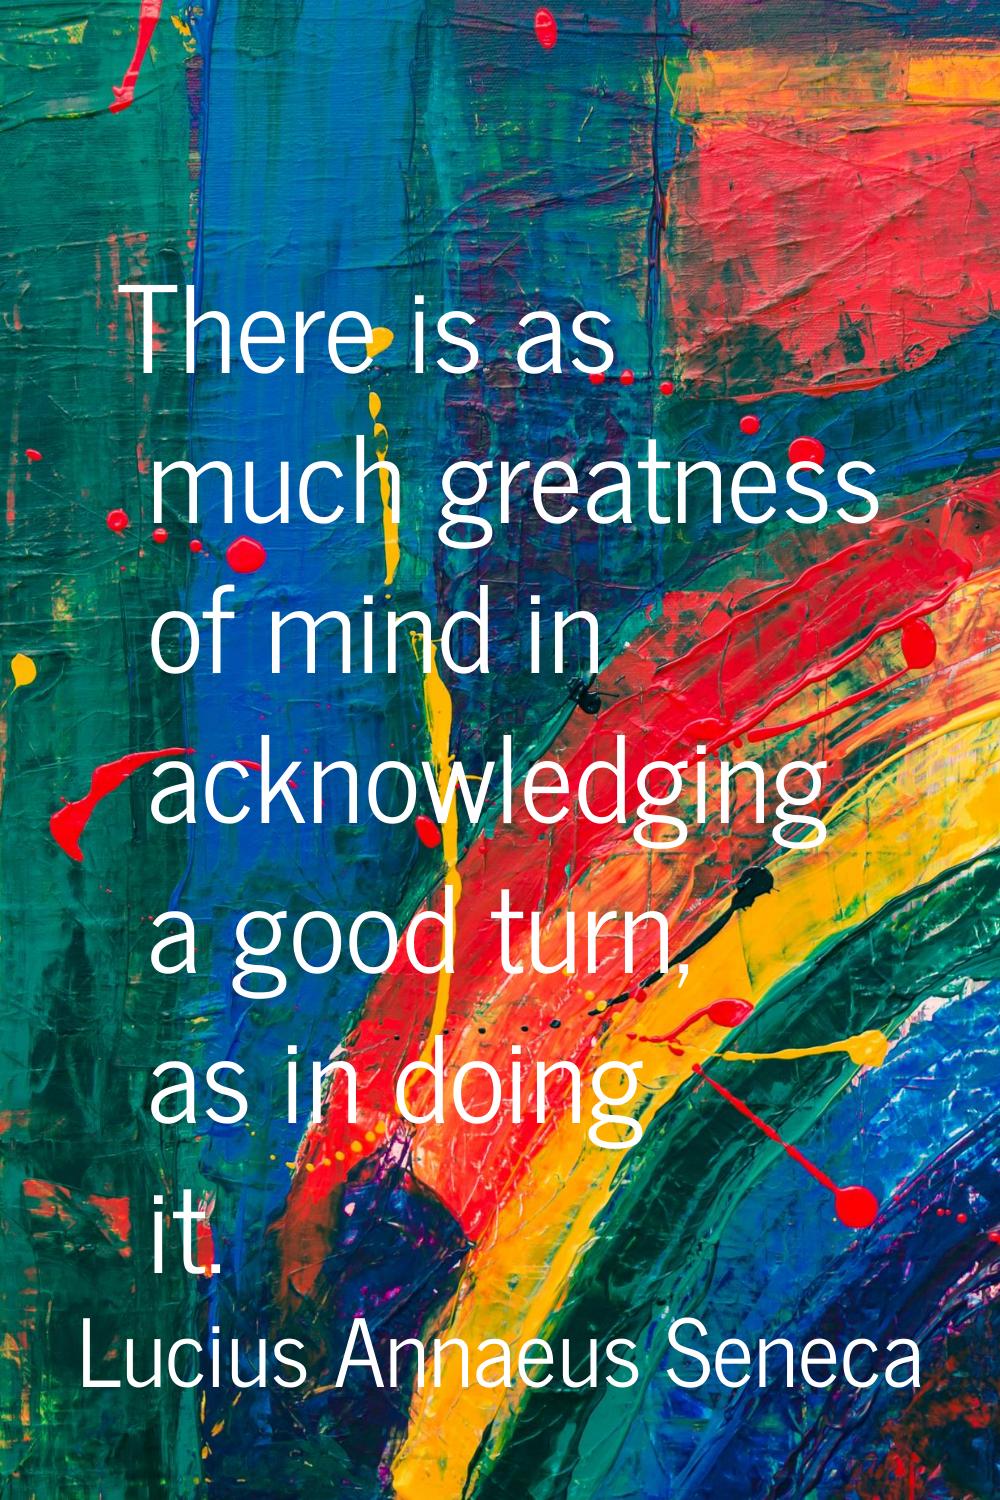 There is as much greatness of mind in acknowledging a good turn, as in doing it.